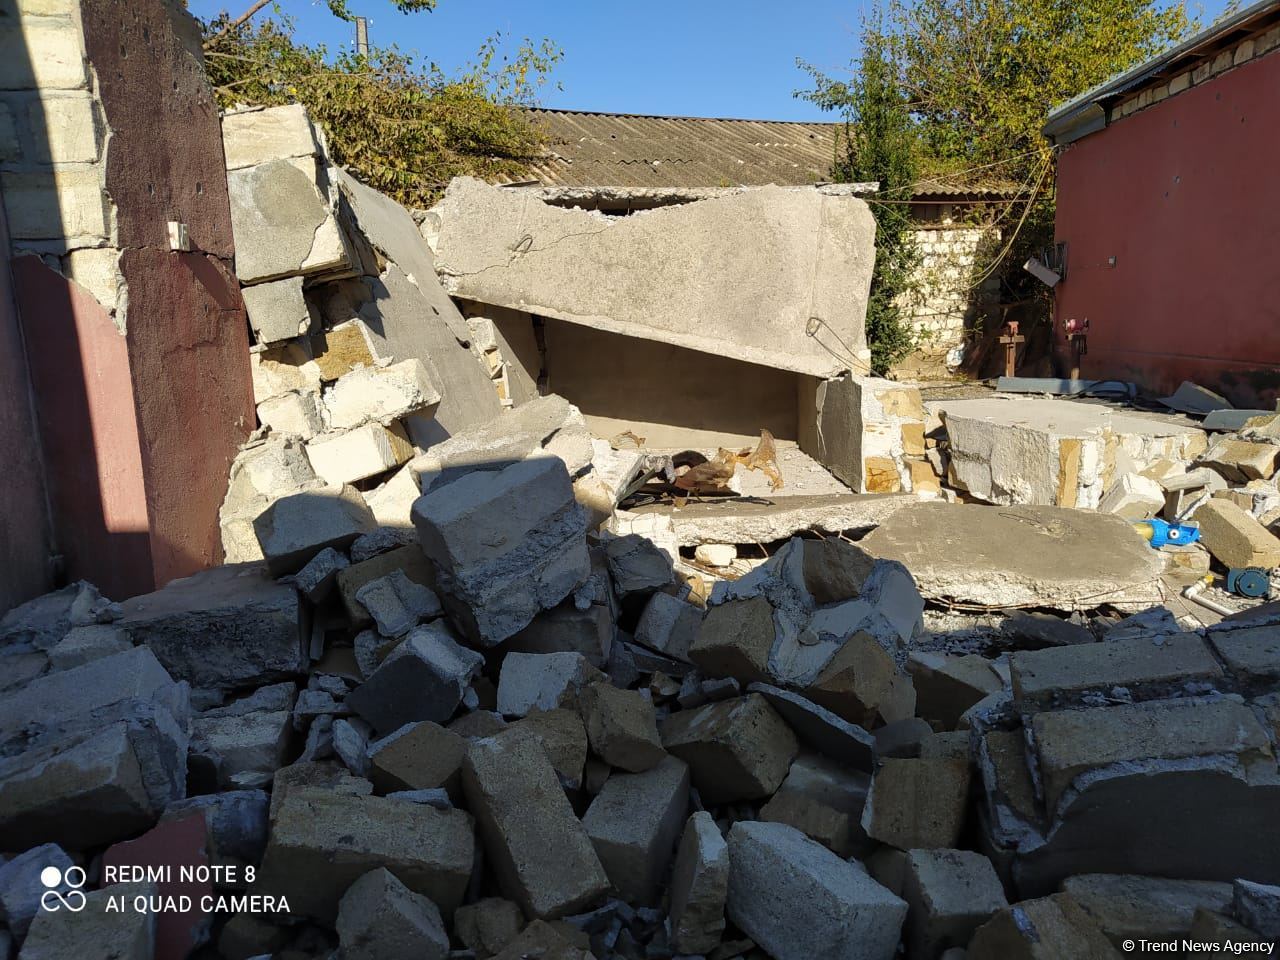 Armenian Armed Forces bombard Tartar's Askipara village, inflict serious damages (PHOTO)